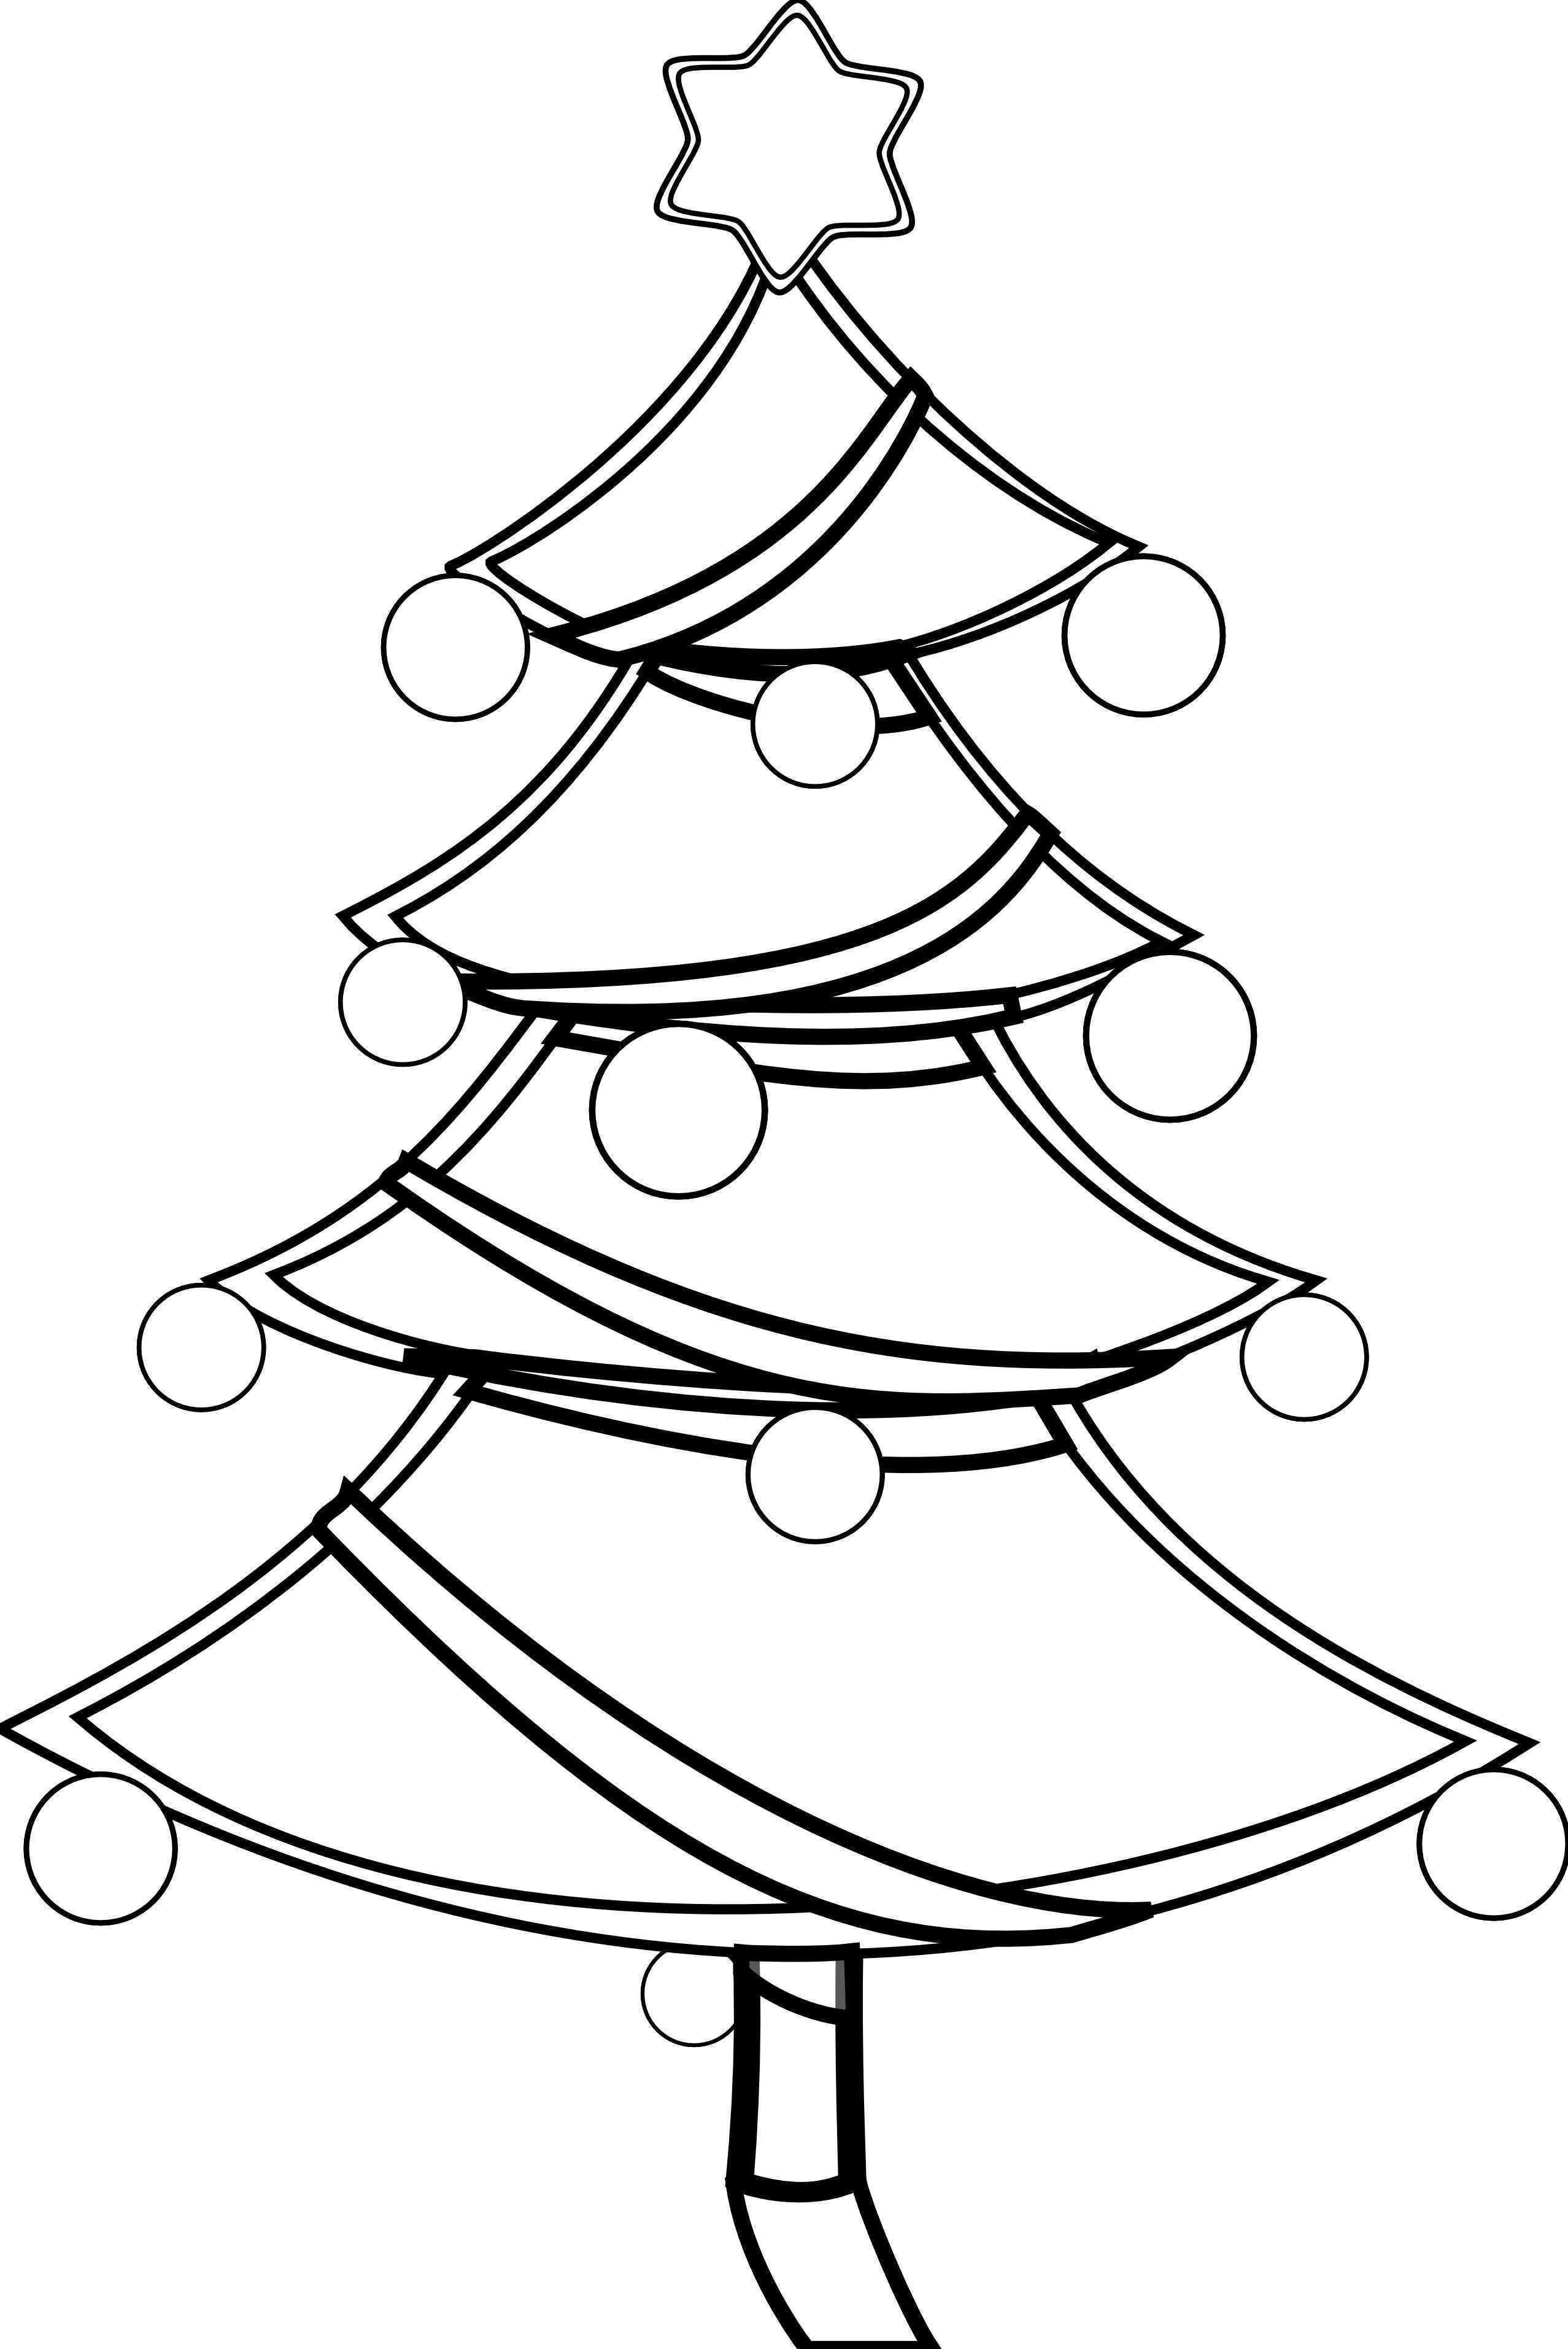 11+ Fresh Christmas Tree with Presents Clip Art.